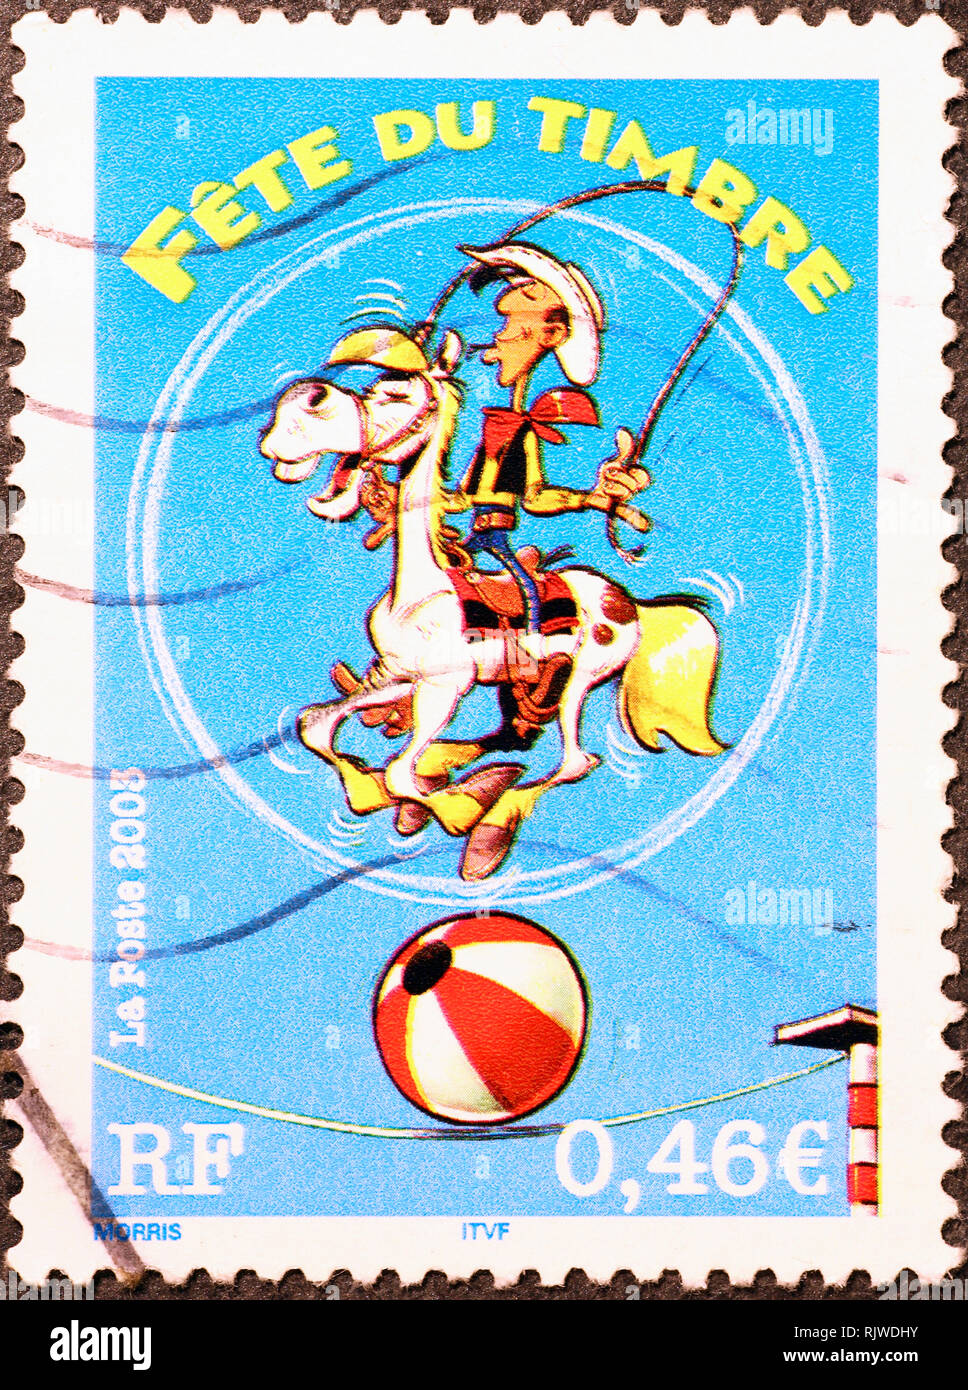 Lucky Luke on french postage stamp Stock Photo